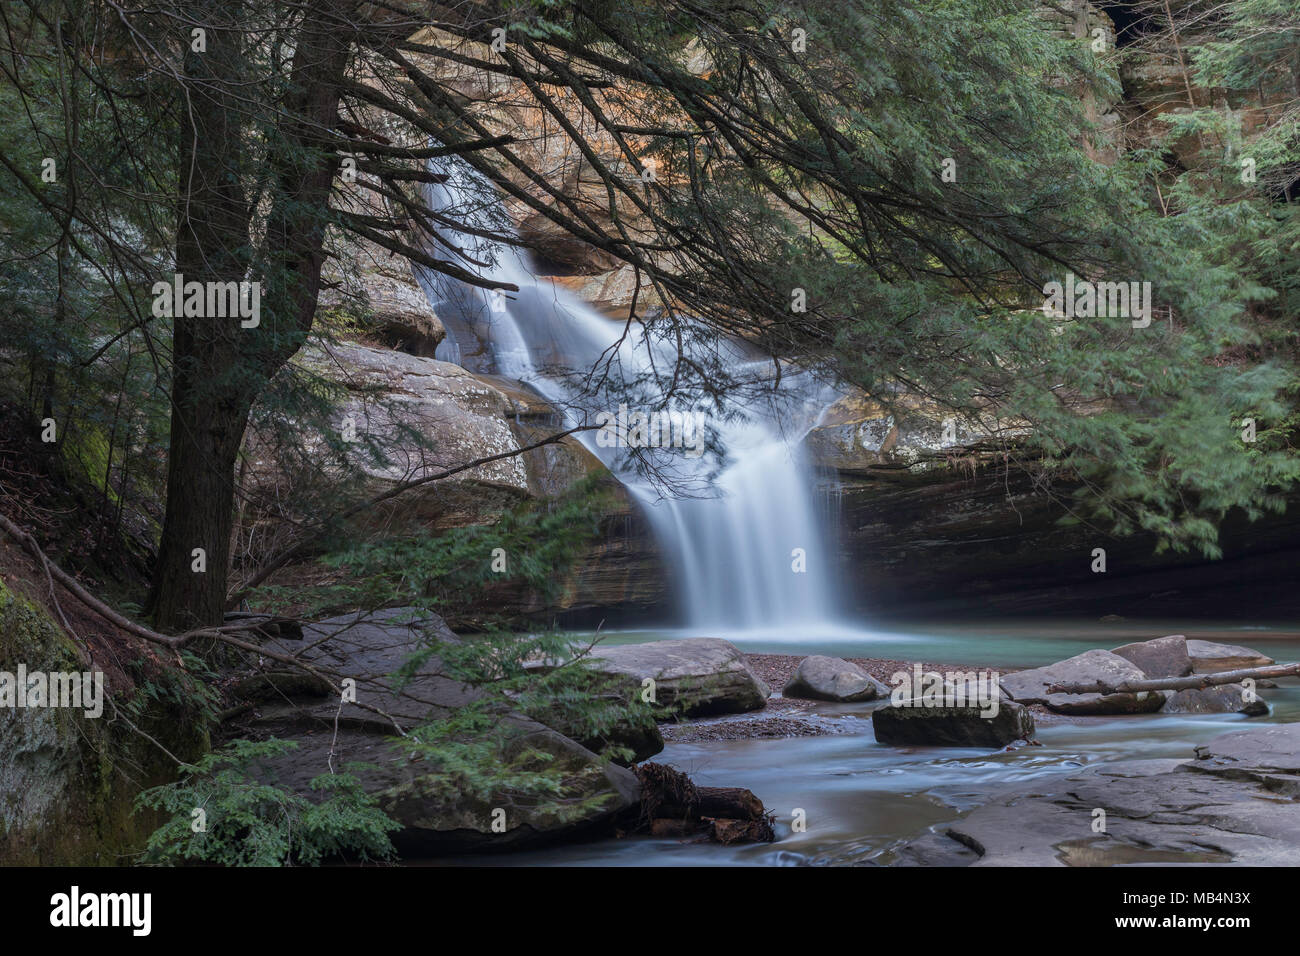 Cedar Falls located in Hocking Hills State Park. Stock Photo